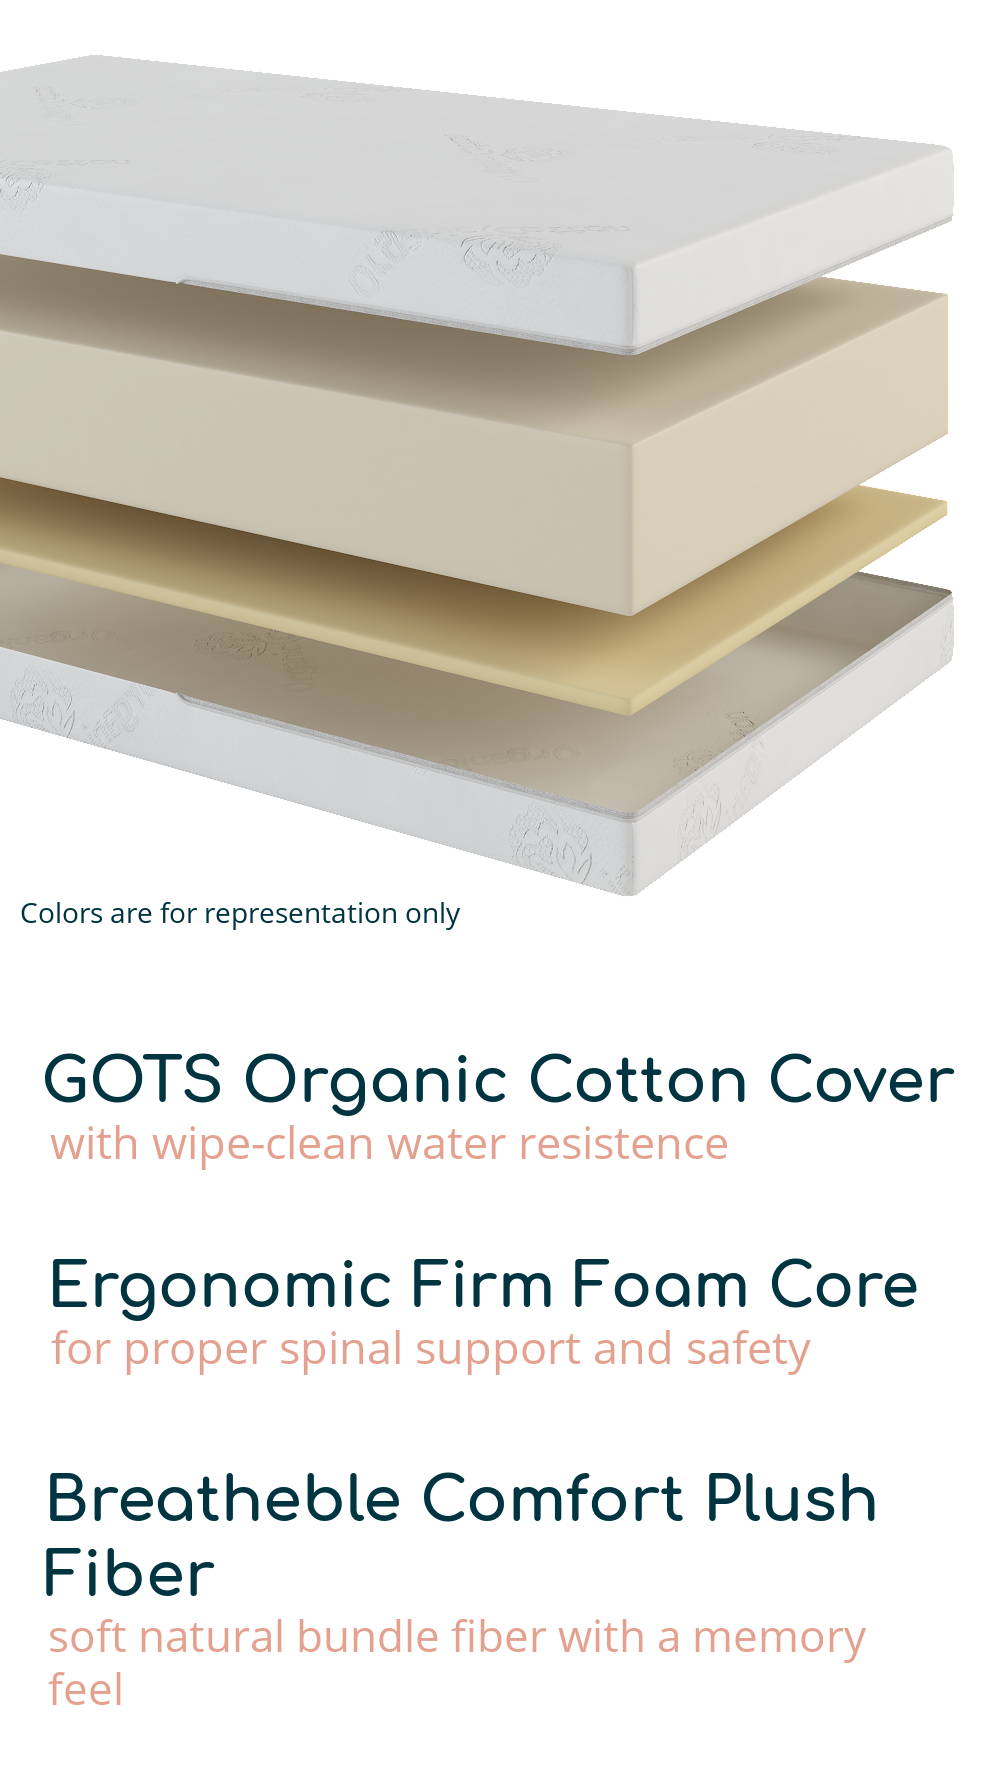 GOTS Organic Cotton Cover-with wipe clean resistance, Ergonomic Firm Foam Core-for proper spinal support and safety, and Breathable Comfort Plush Fiber-soft natura bundle fiber with a memory feel for the toddler side. 